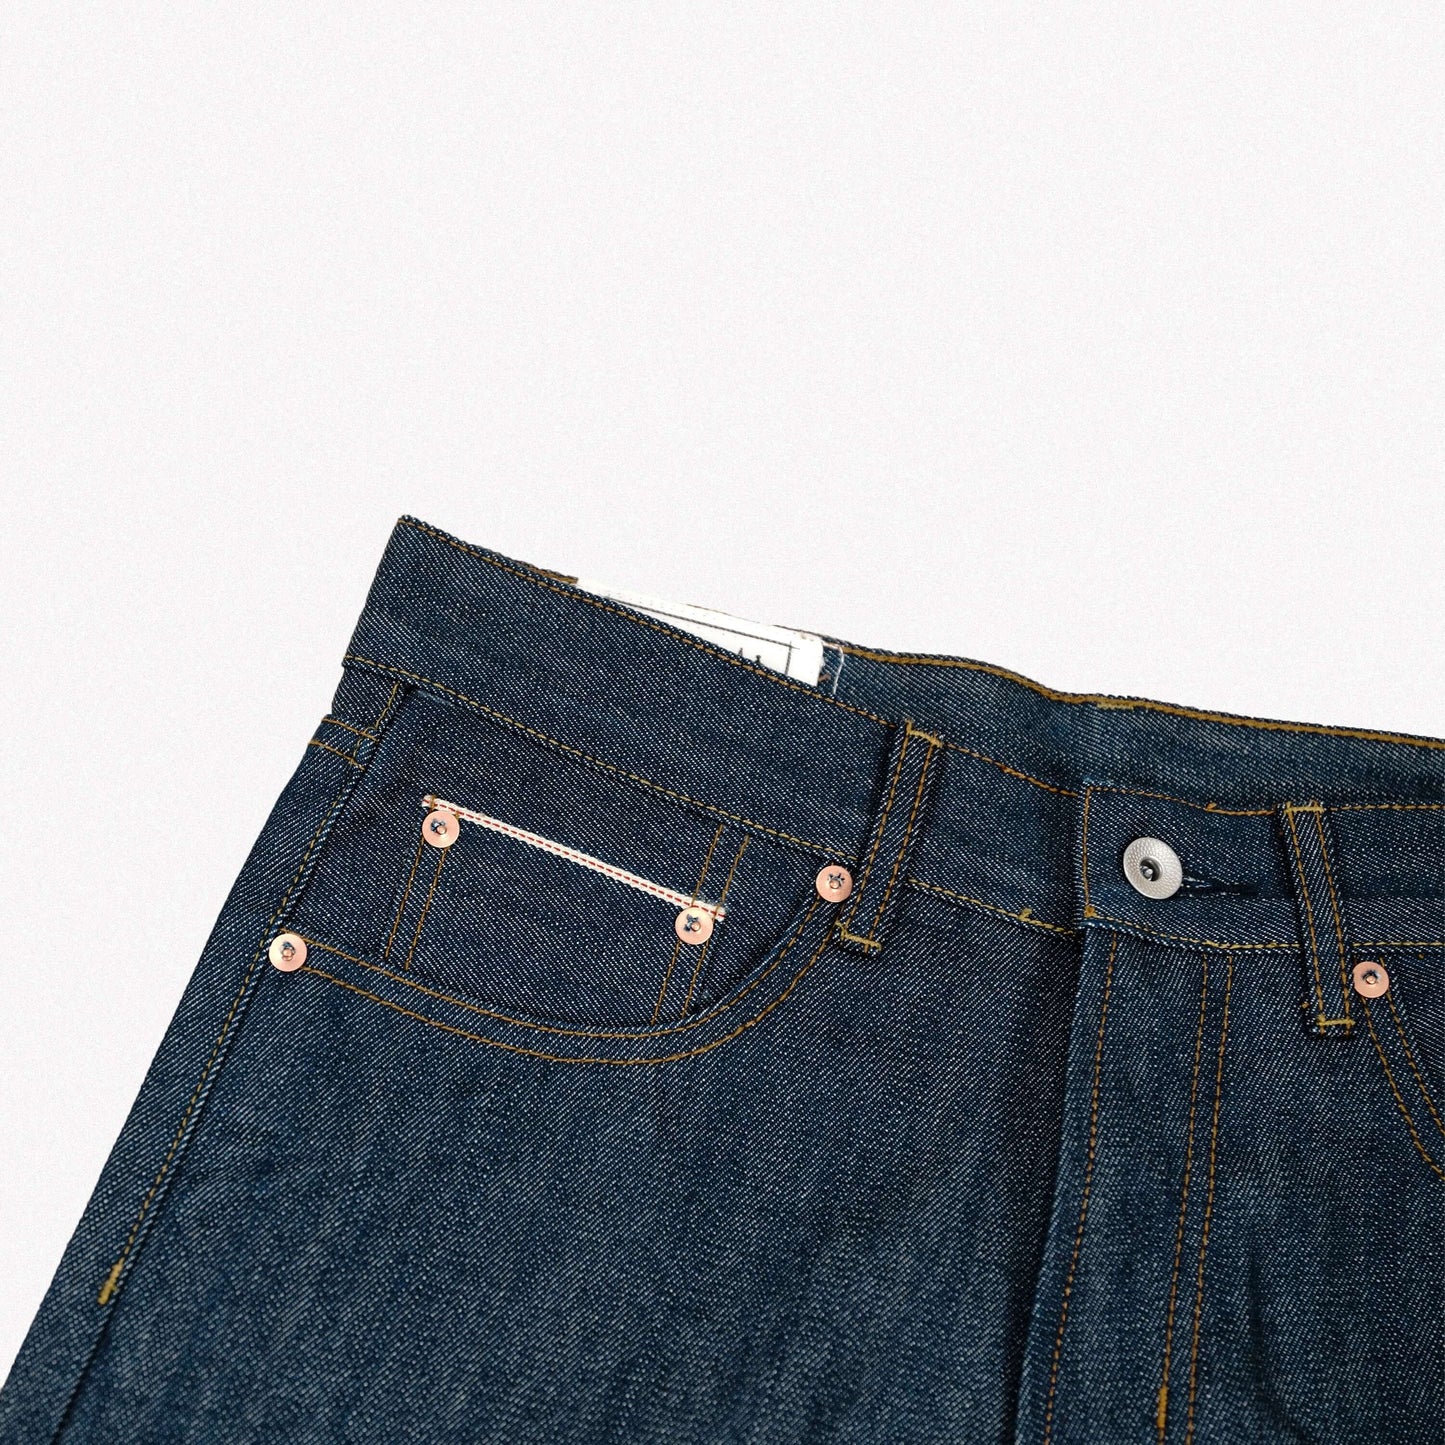 14oz. Bamboo Fabric Selvage Jeans II